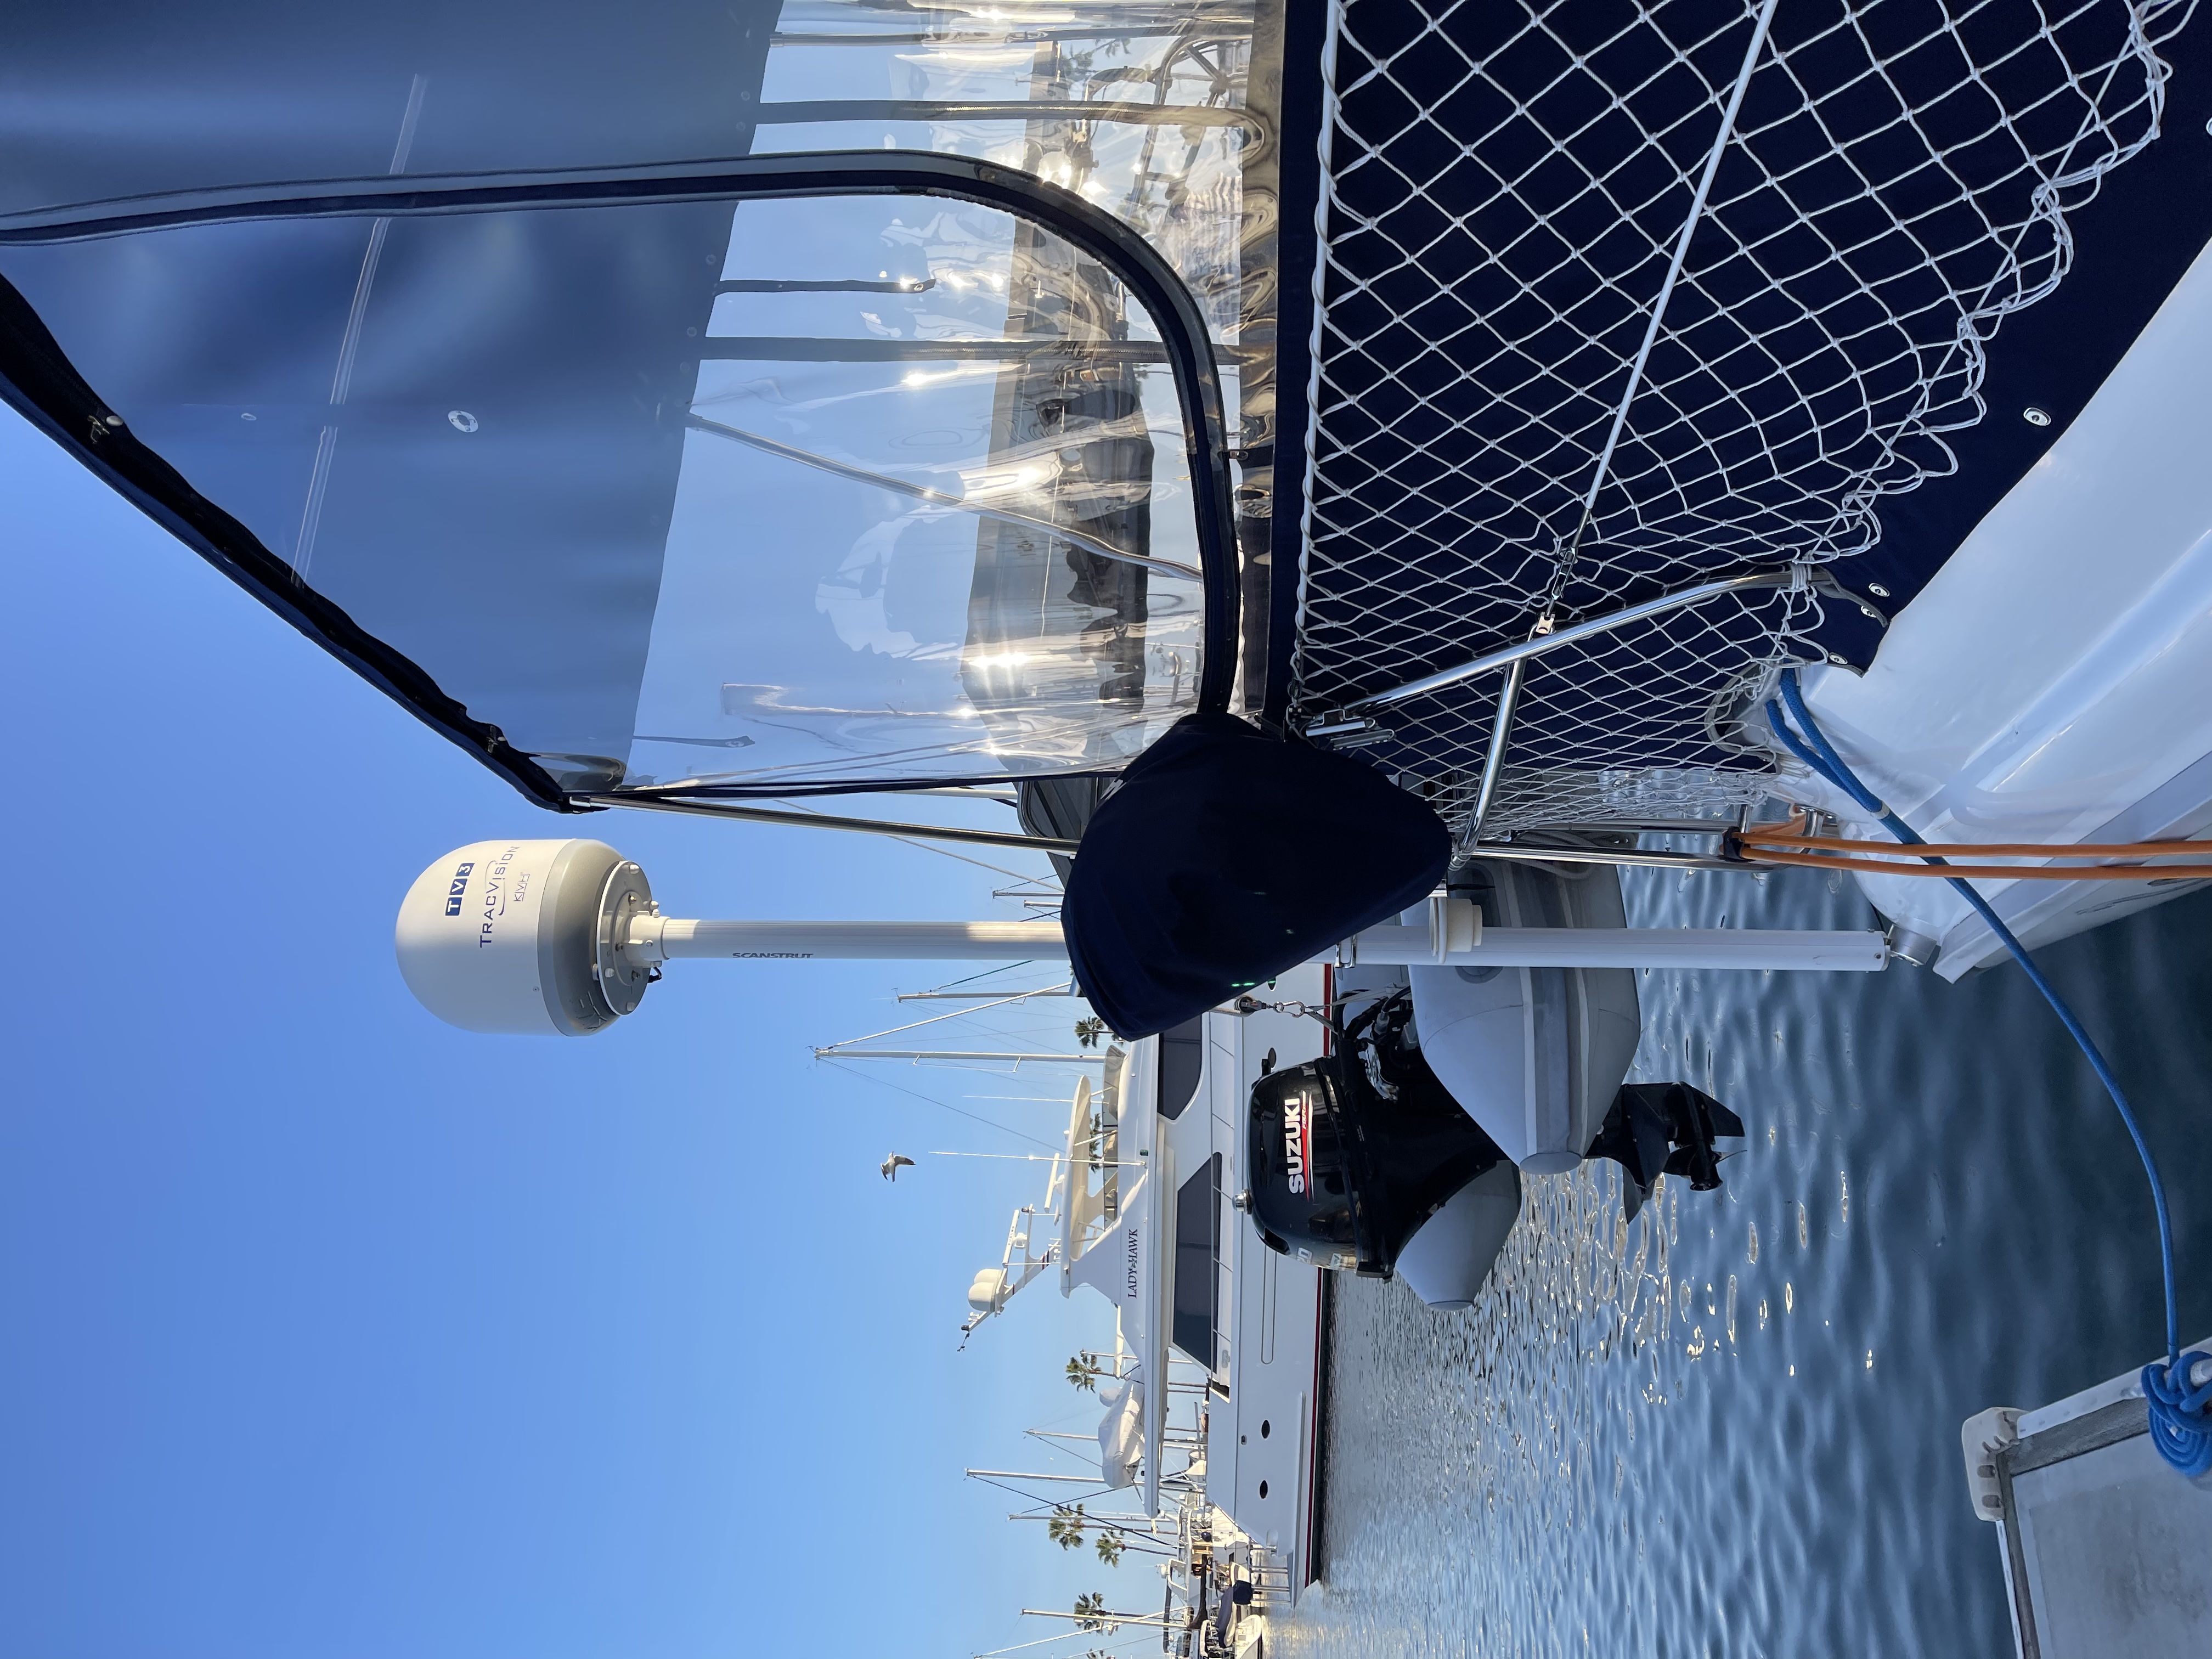 1998 Hunter Passage 450 Sailboat for sale in Long Beach, CA - image 12 